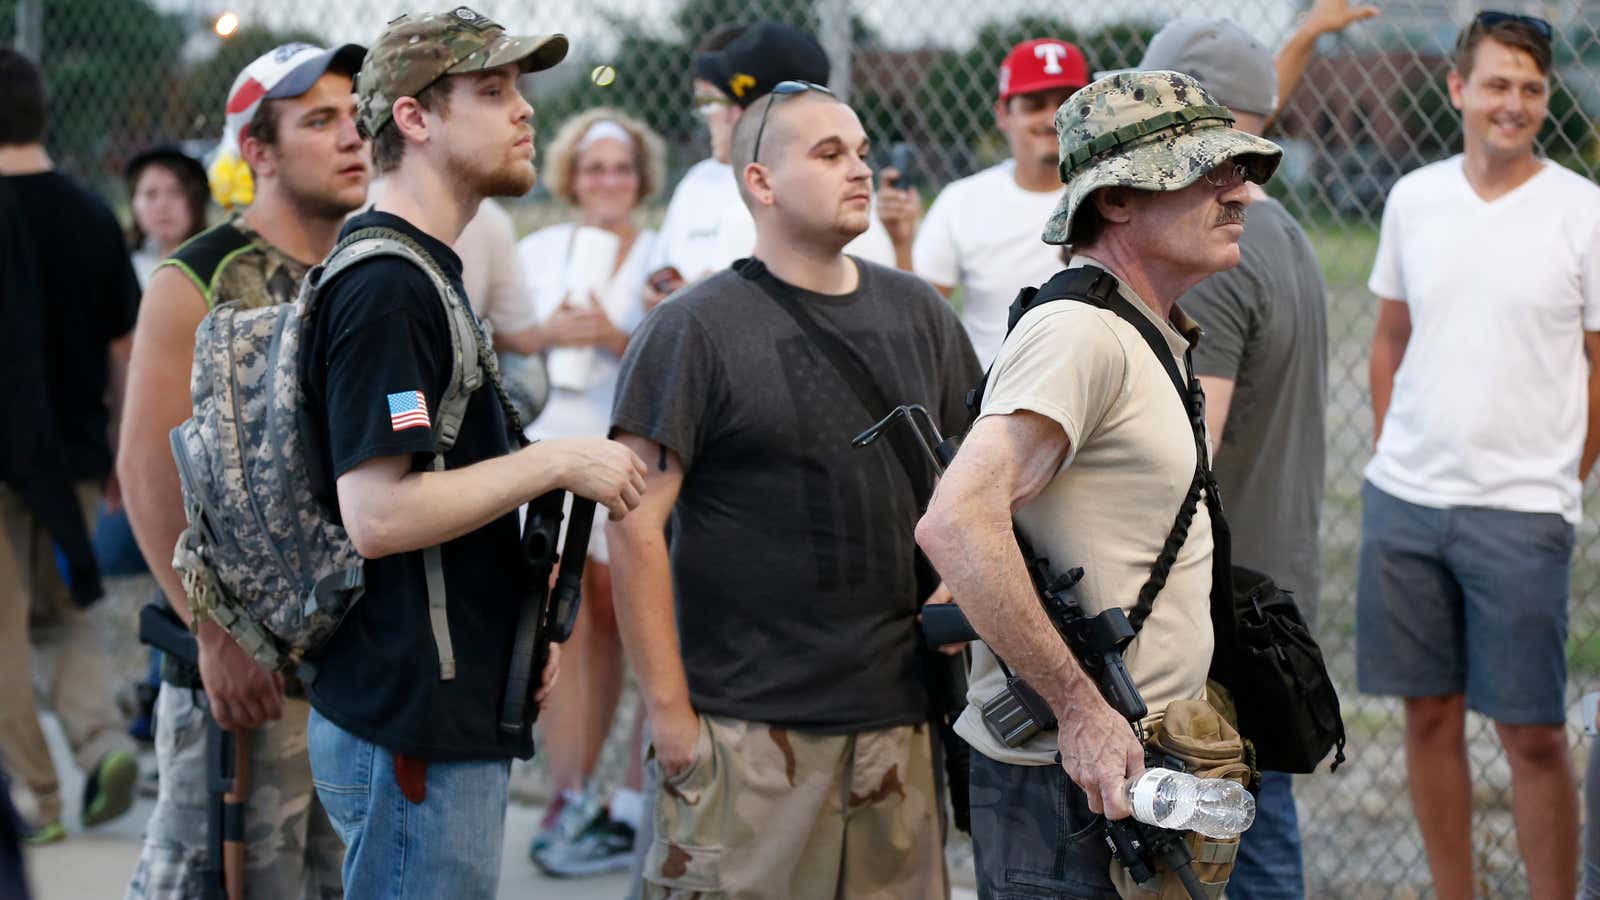 Men carry guns outside a Trump campaign rally in June.